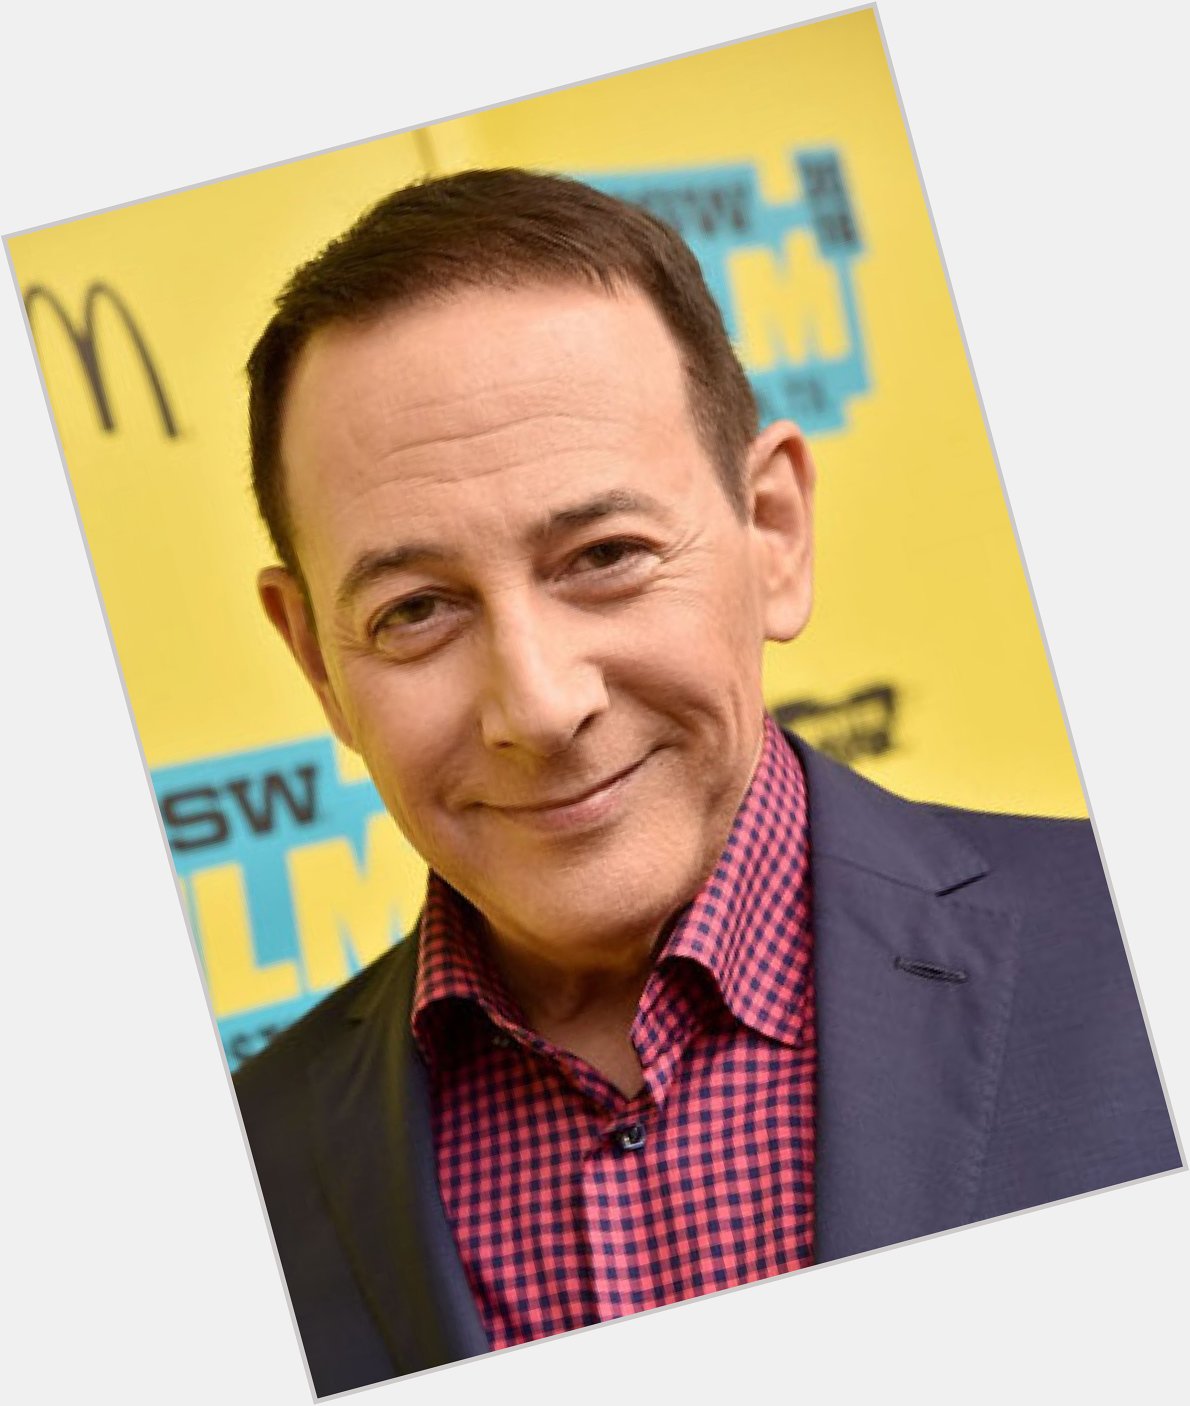 Actor. Director. Groundling. Adventurer. Mystery Man!
Happy Birthday to Paul Reubens, the one and only 